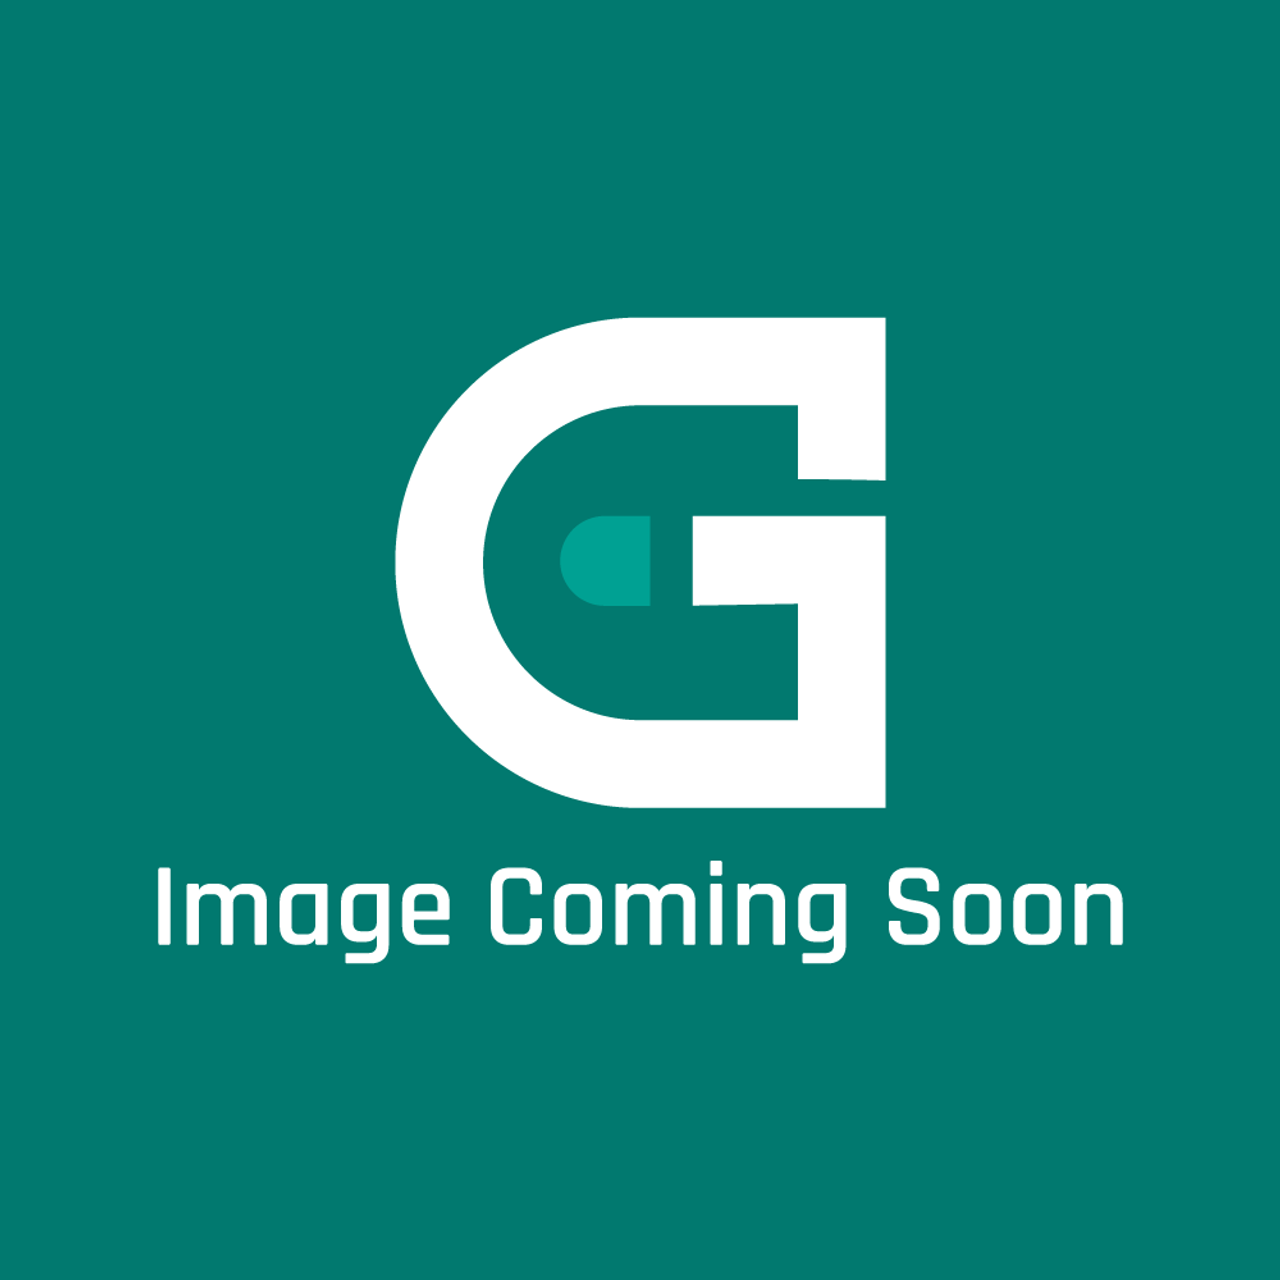 GE Appliances WB63T10083 - Frame Frt Lower - Image Coming Soon!